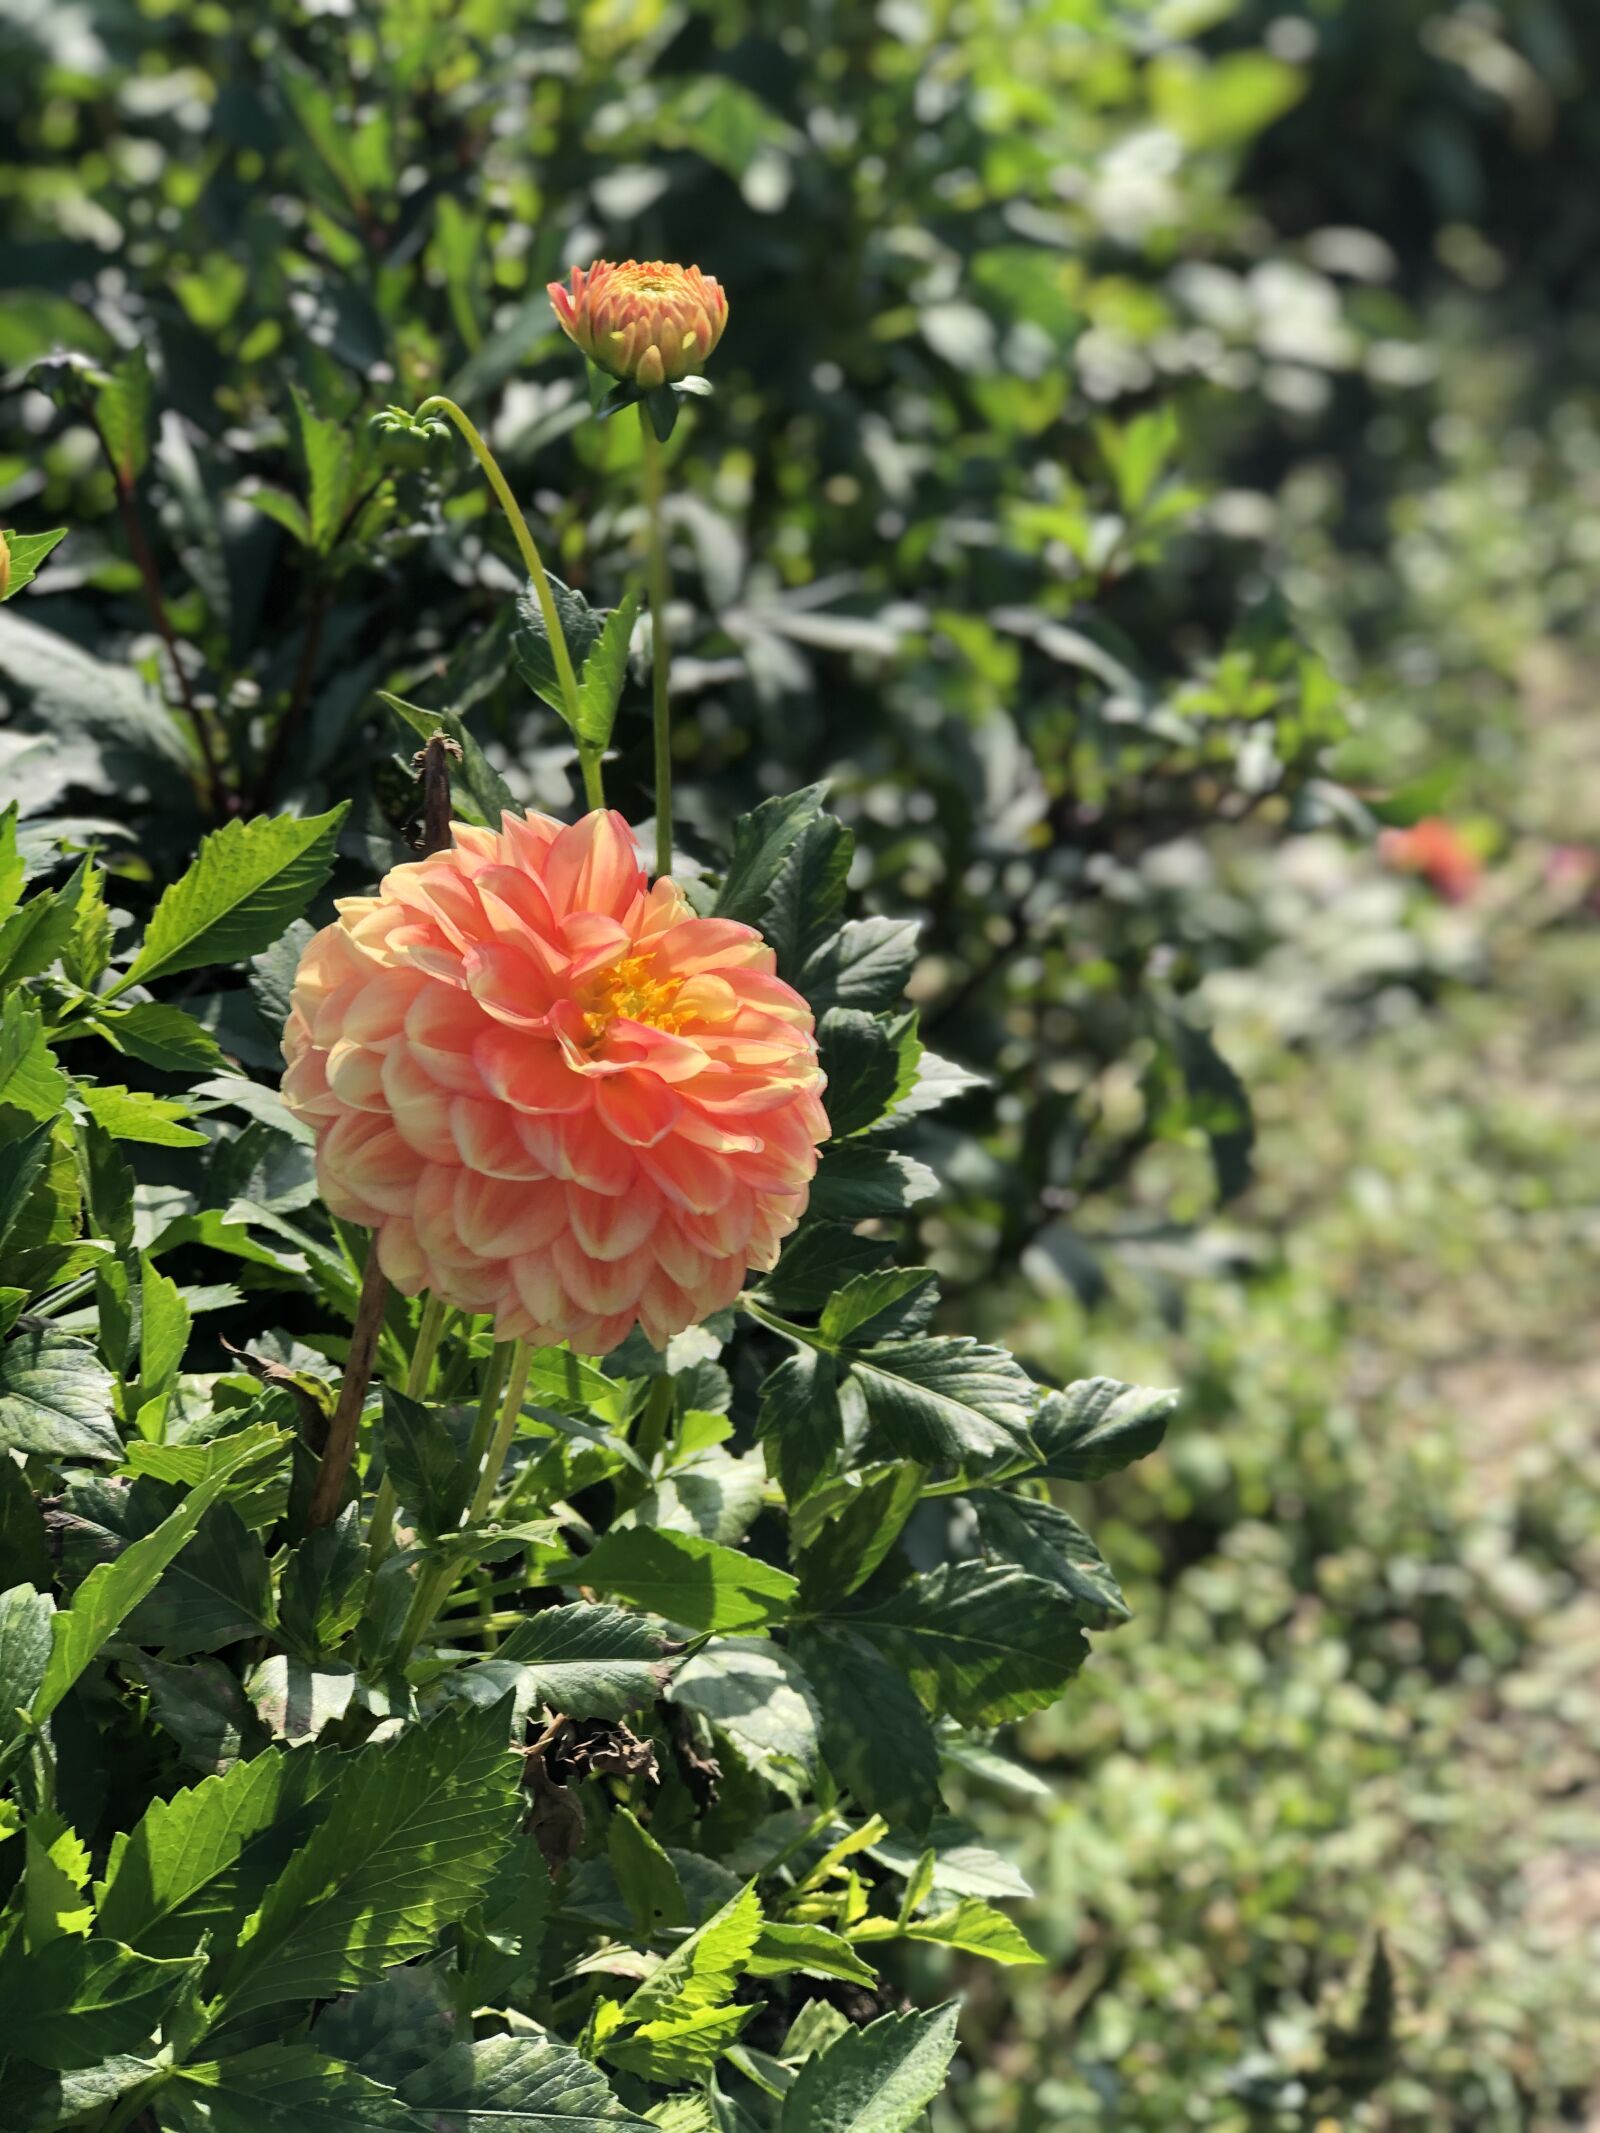 Apple iPhone 8 Plus + iPhone 8 Plus back dual camera 6.6mm f/2.8 sample photo. Flowers, flower, summer photography